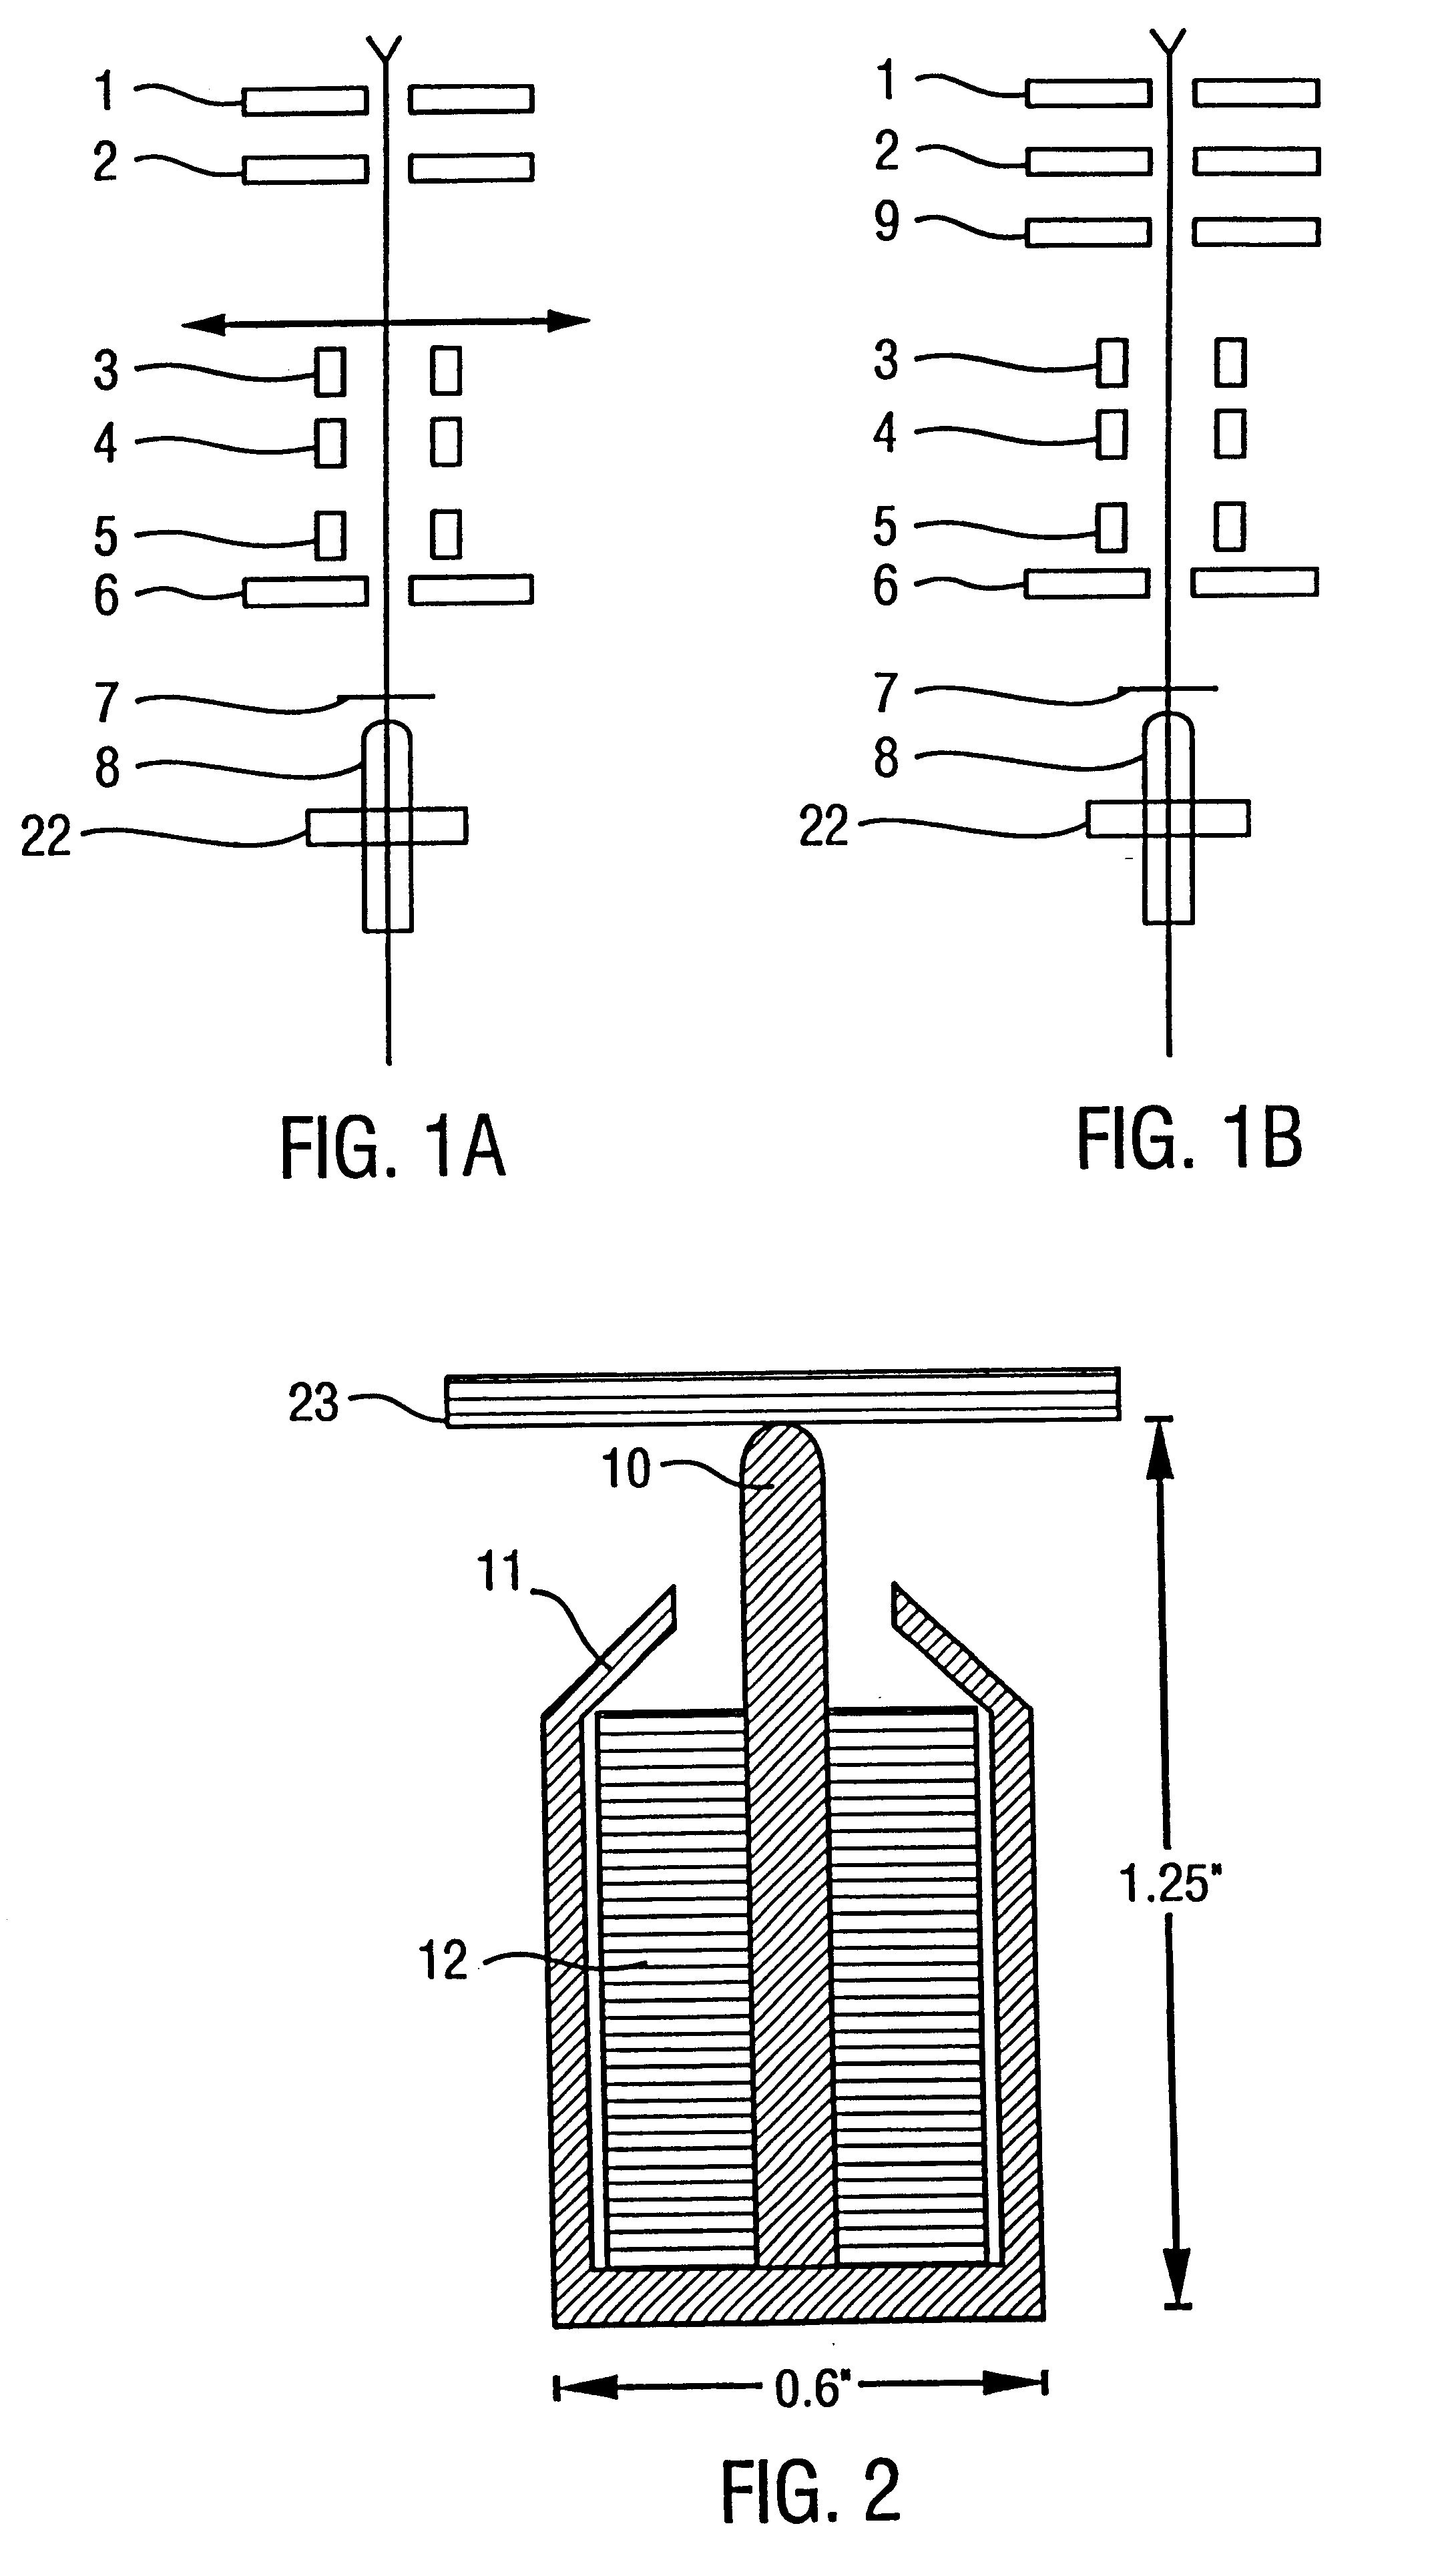 Magnetic lens apparatus for use in high-resolution scanning electron microscopes and lithographic processes